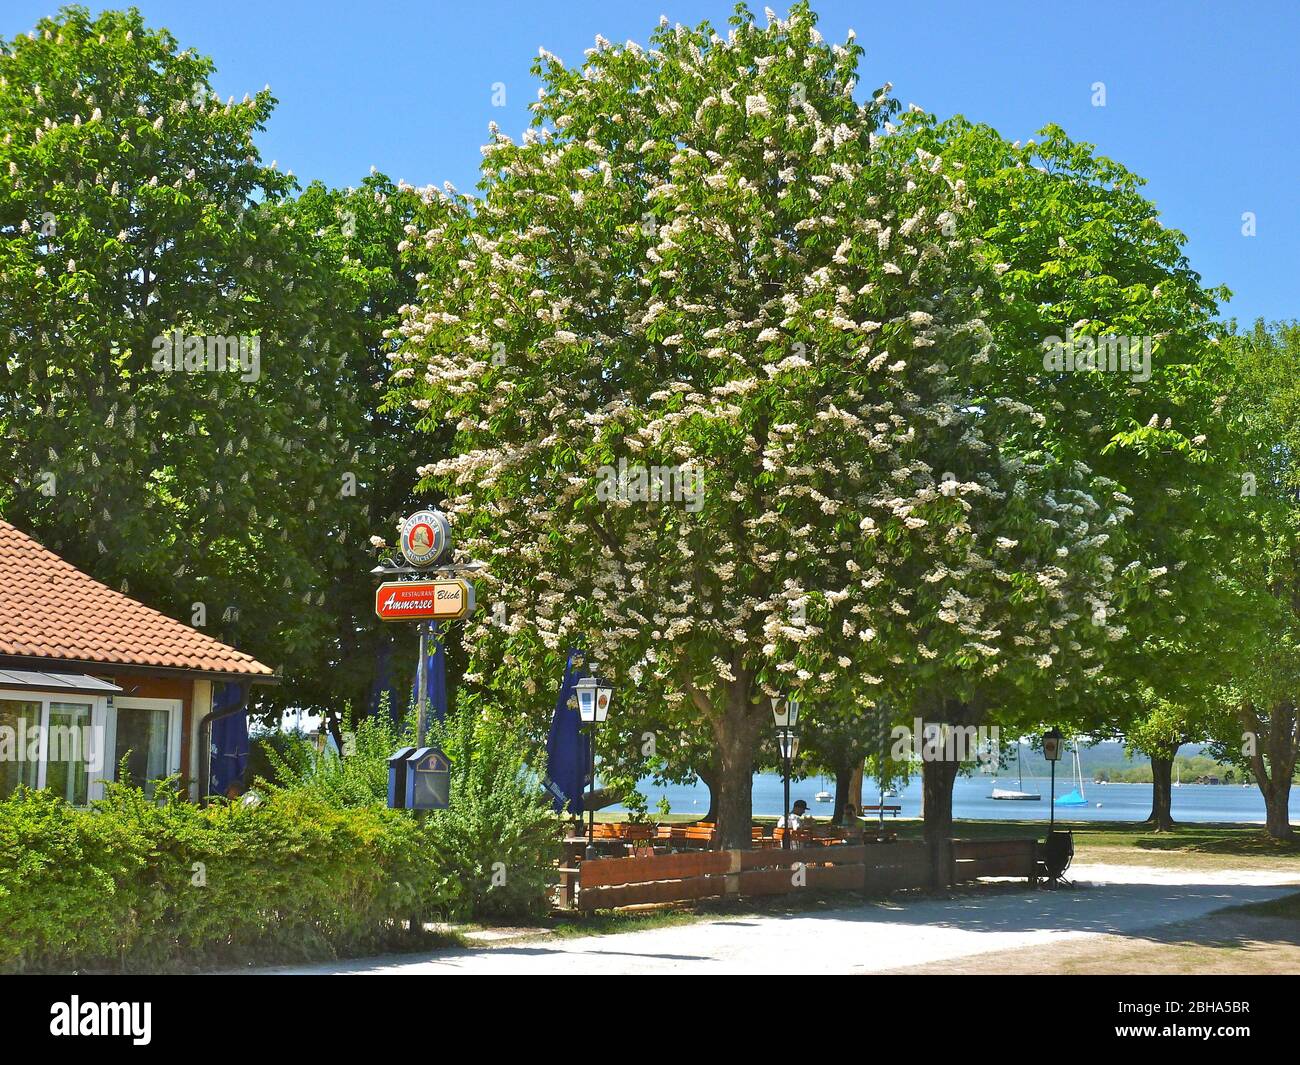 Germany, Upper Bavaria, 5 lakes, Ammersee, Herrsching, restaurant and chestnut trees Stock Photo